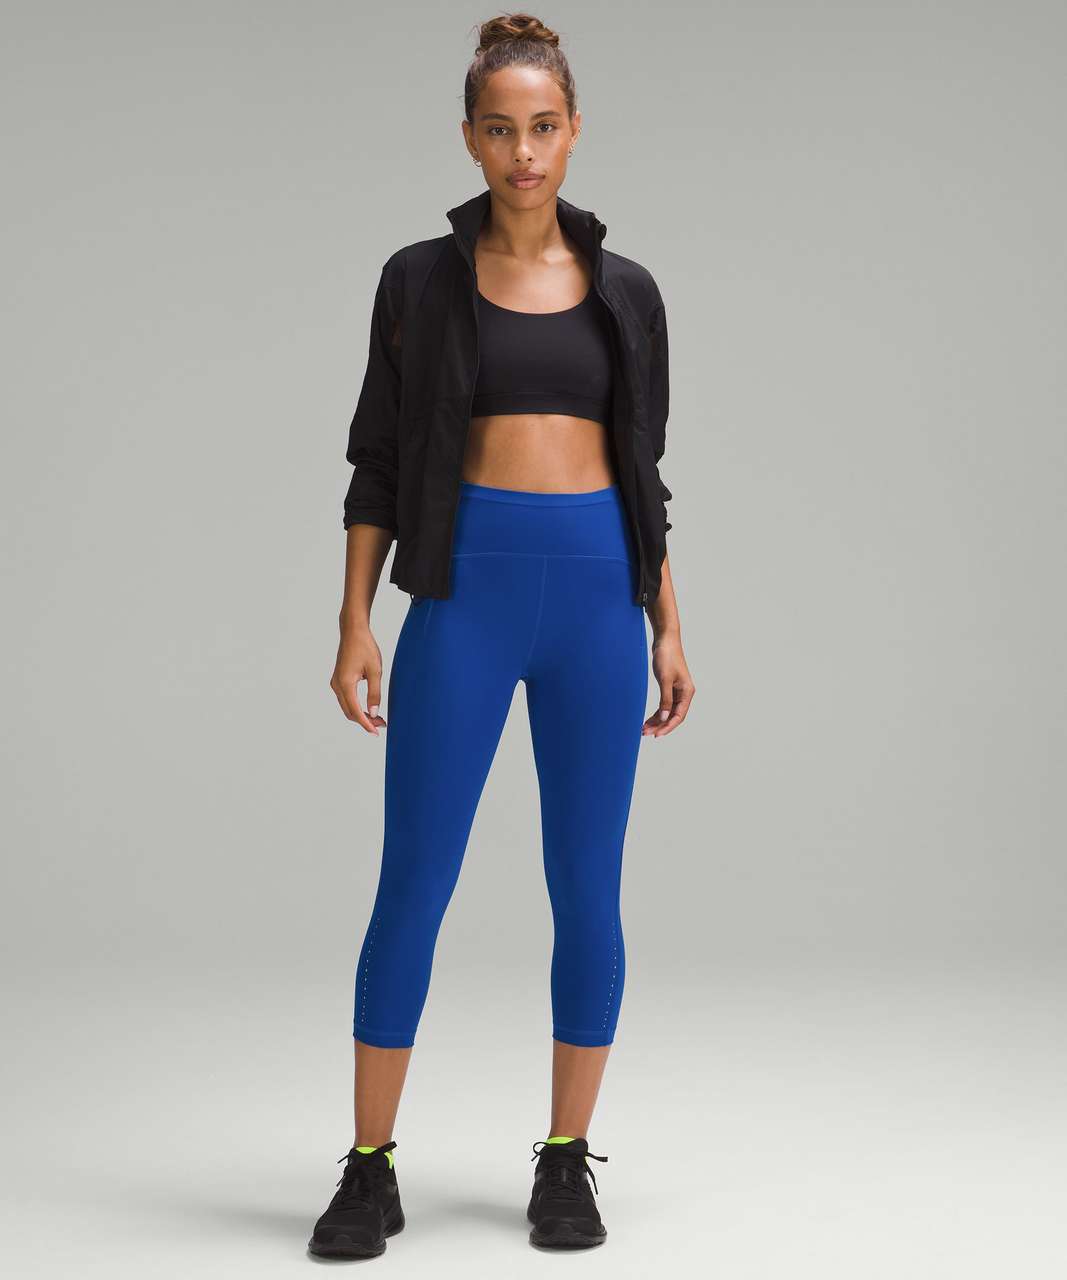 WT Cropped long sleeve Iron blue and WT leggings Chambray. Love blue colors  😻 : r/lululemon